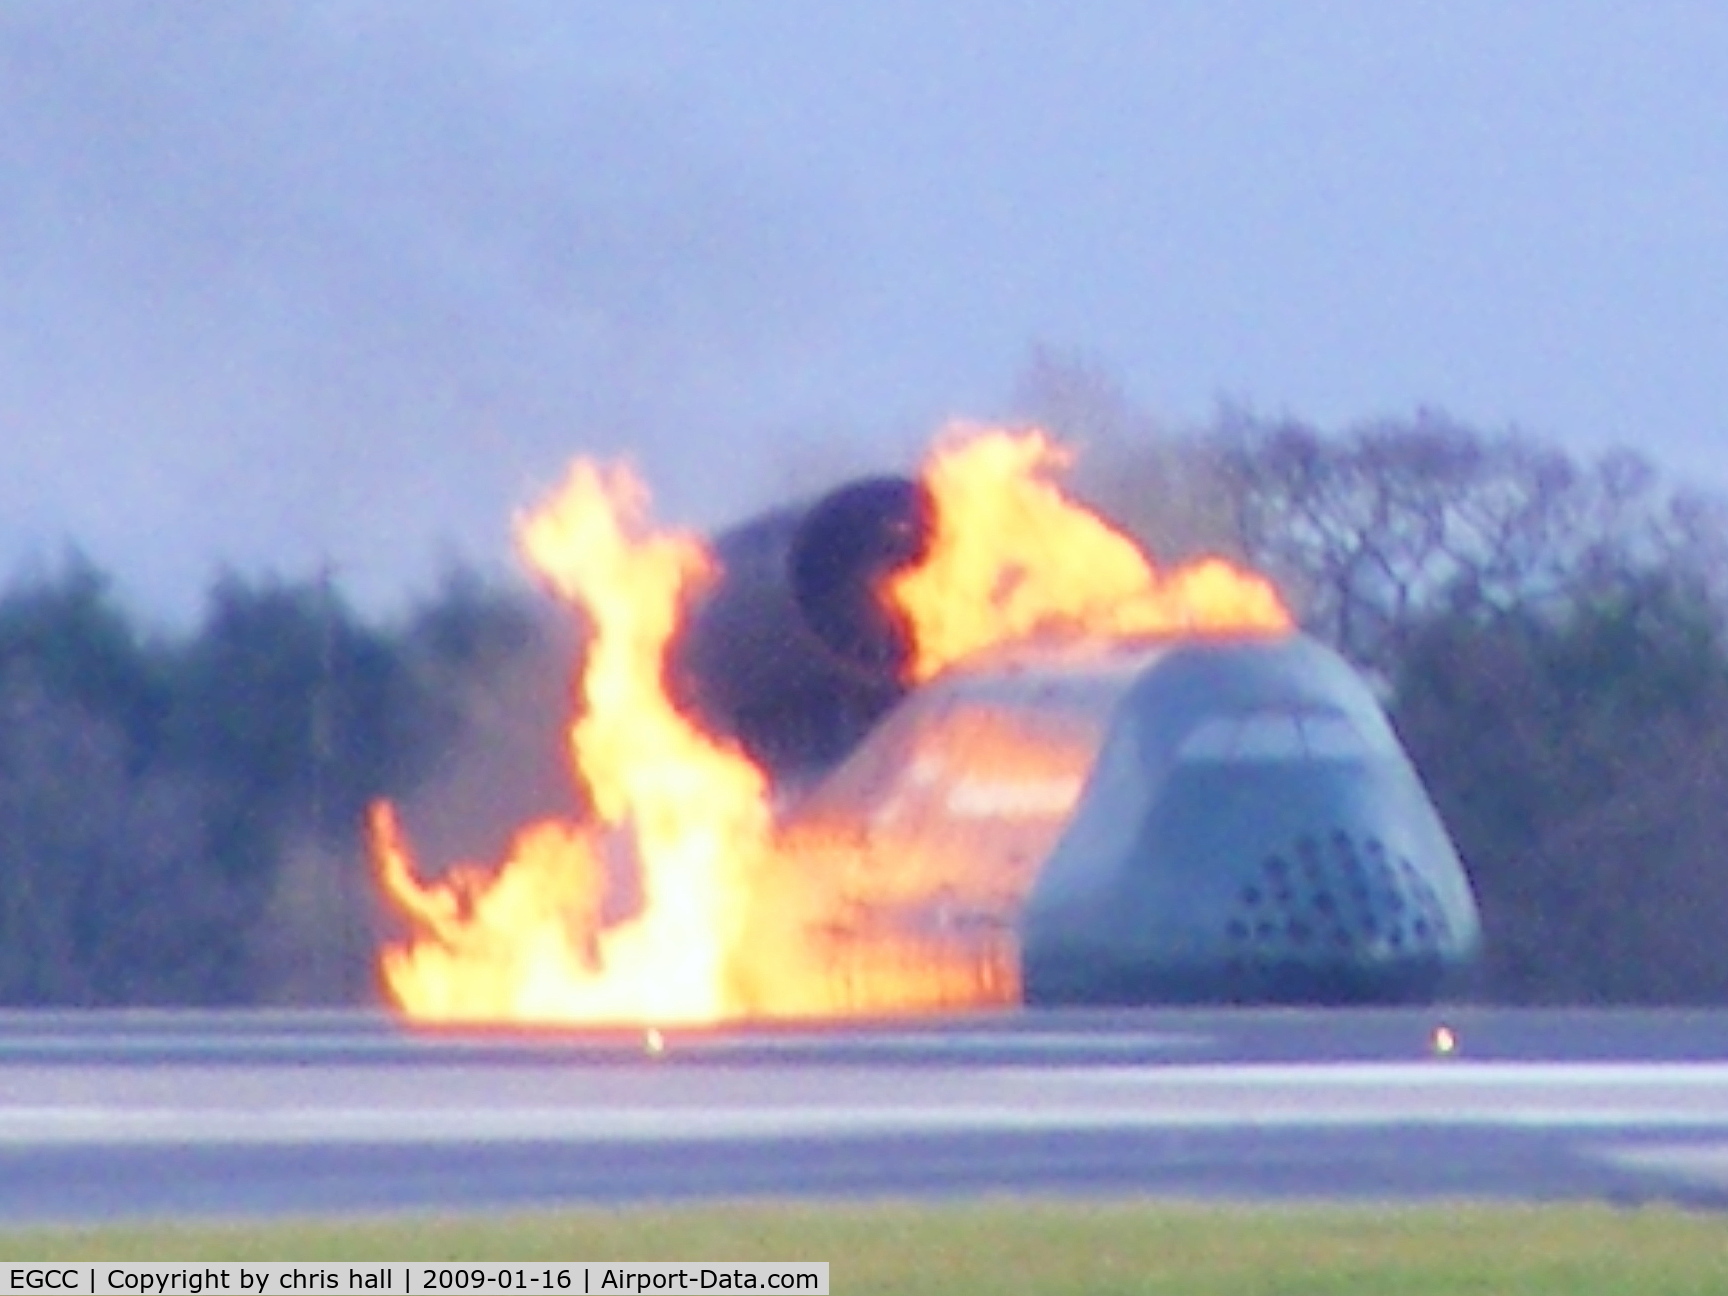 Manchester Airport, Manchester, England United Kingdom (EGCC) - Fire training at Manchester Airport